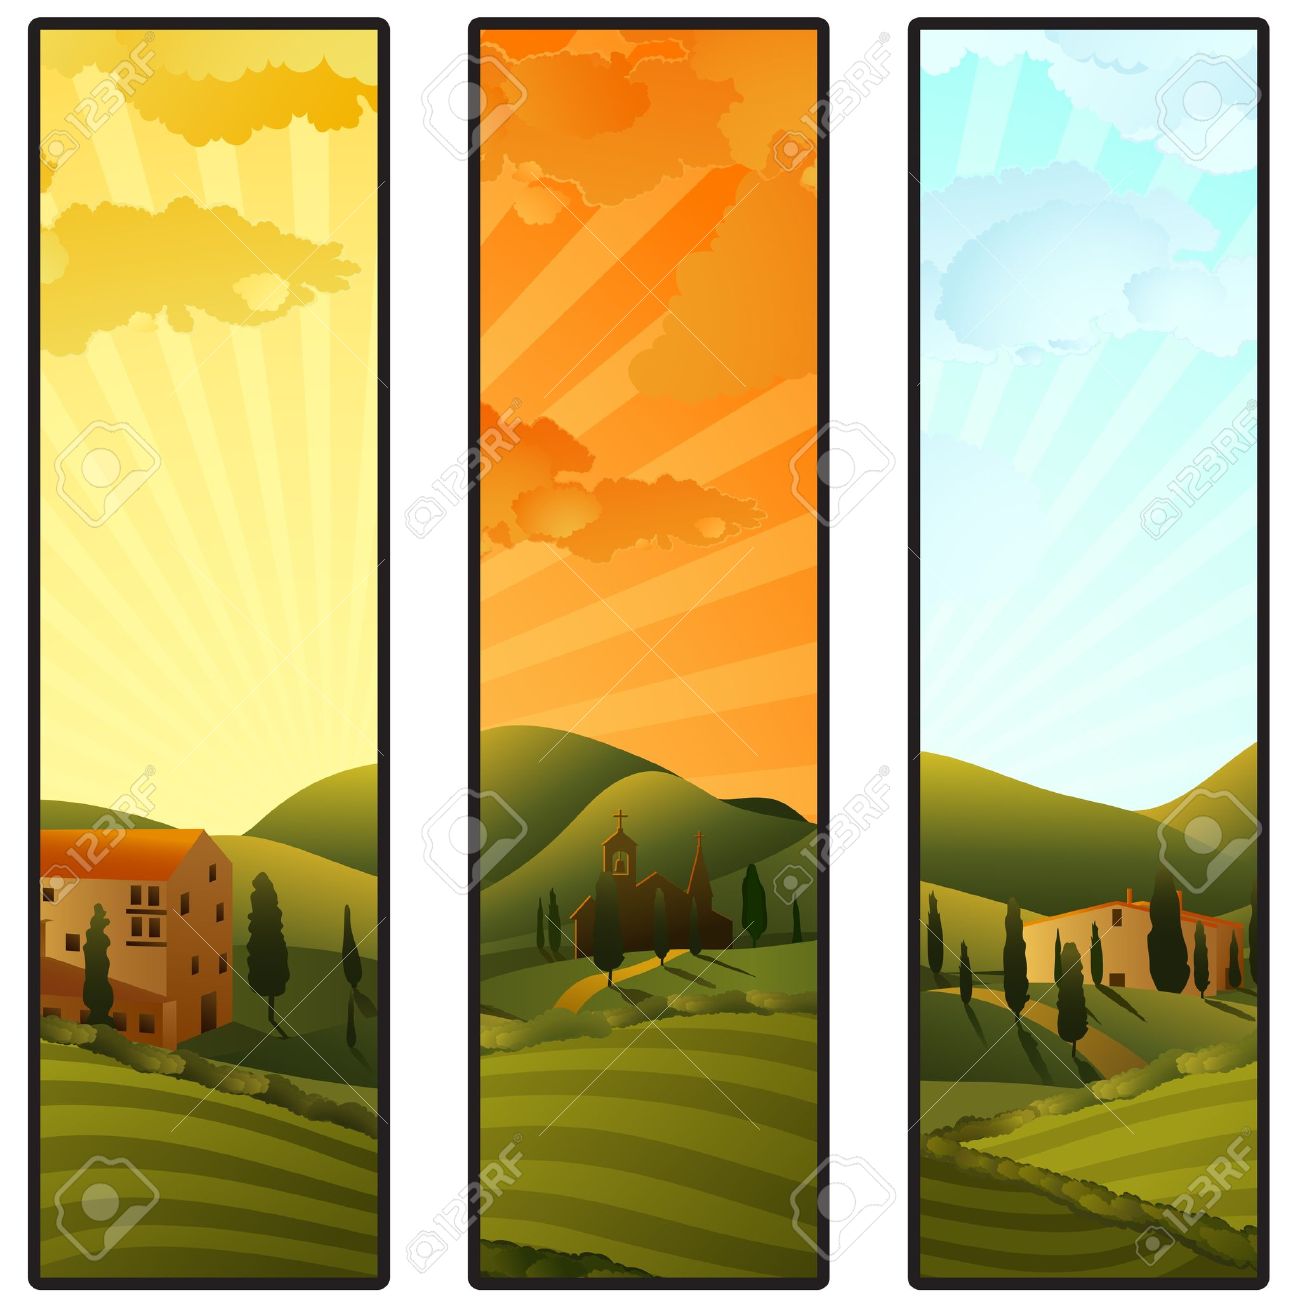 Tuscany clipart #9, Download drawings